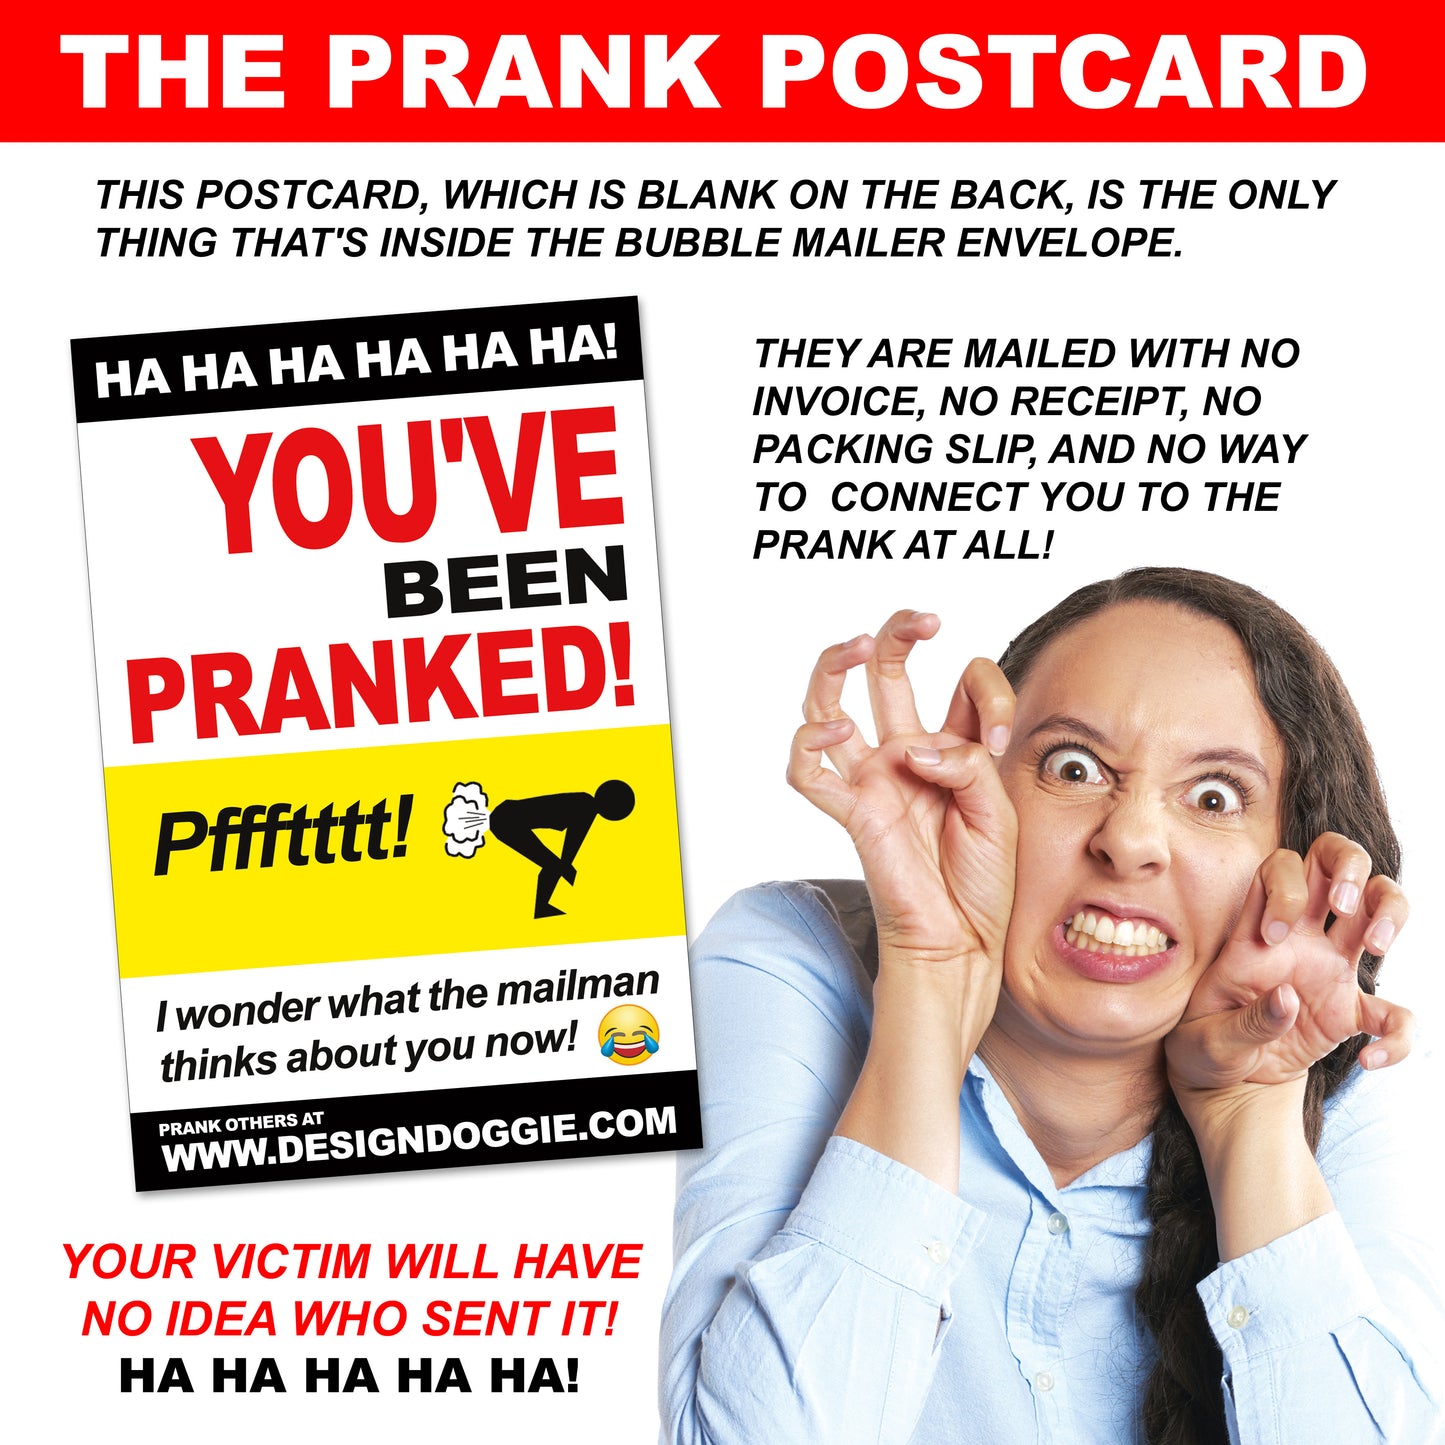 Used Panties embarrassing prank envelope gets mailed directly to your victims 100% anonymously!